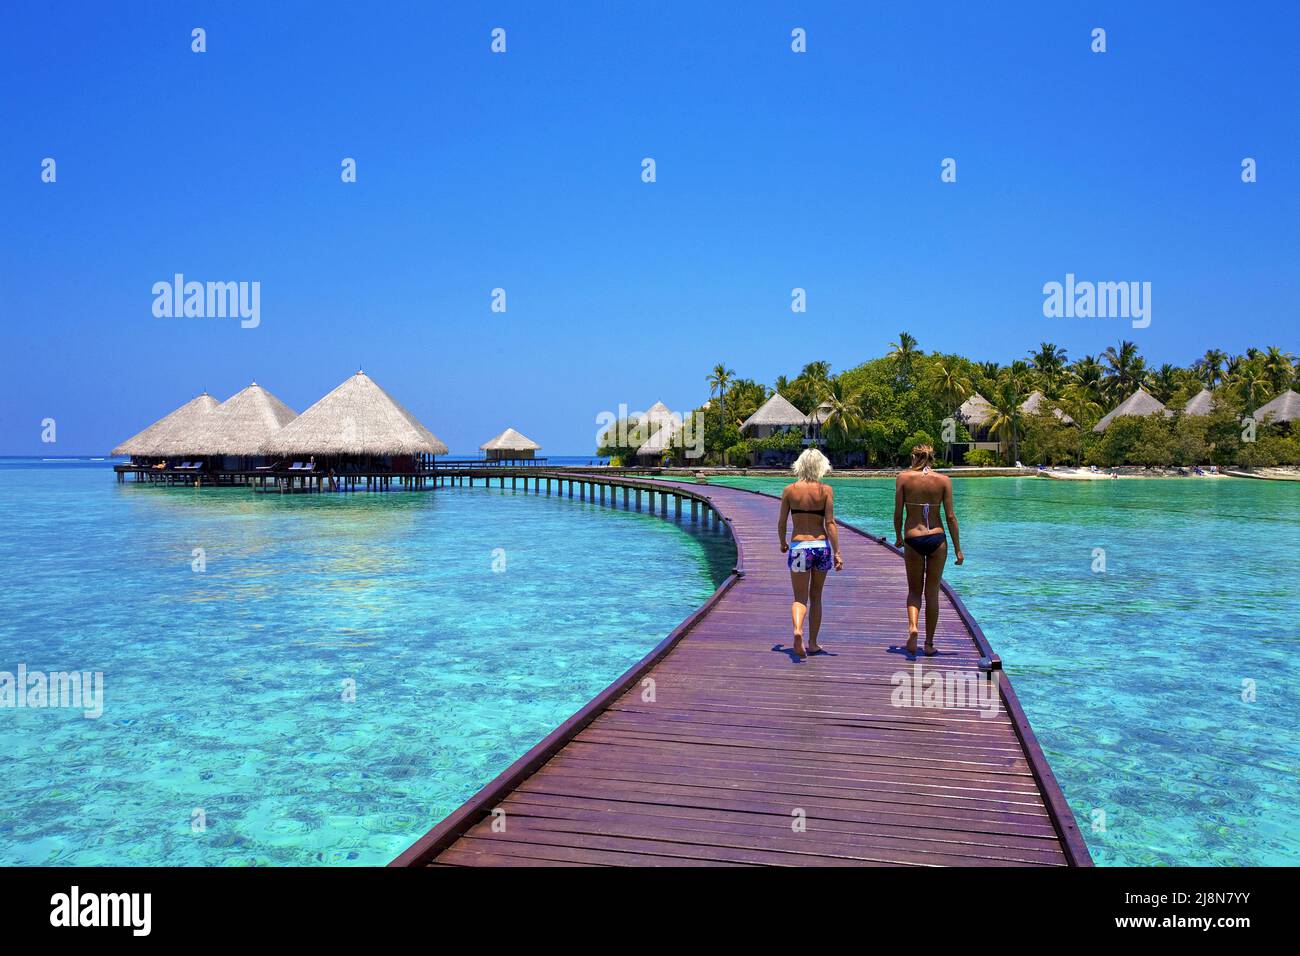 Two girls on the jetty at luxury water bungalows, Rannalhi, Maldives South-Male Atoll, Indian Ocean, Asia Stock Photo